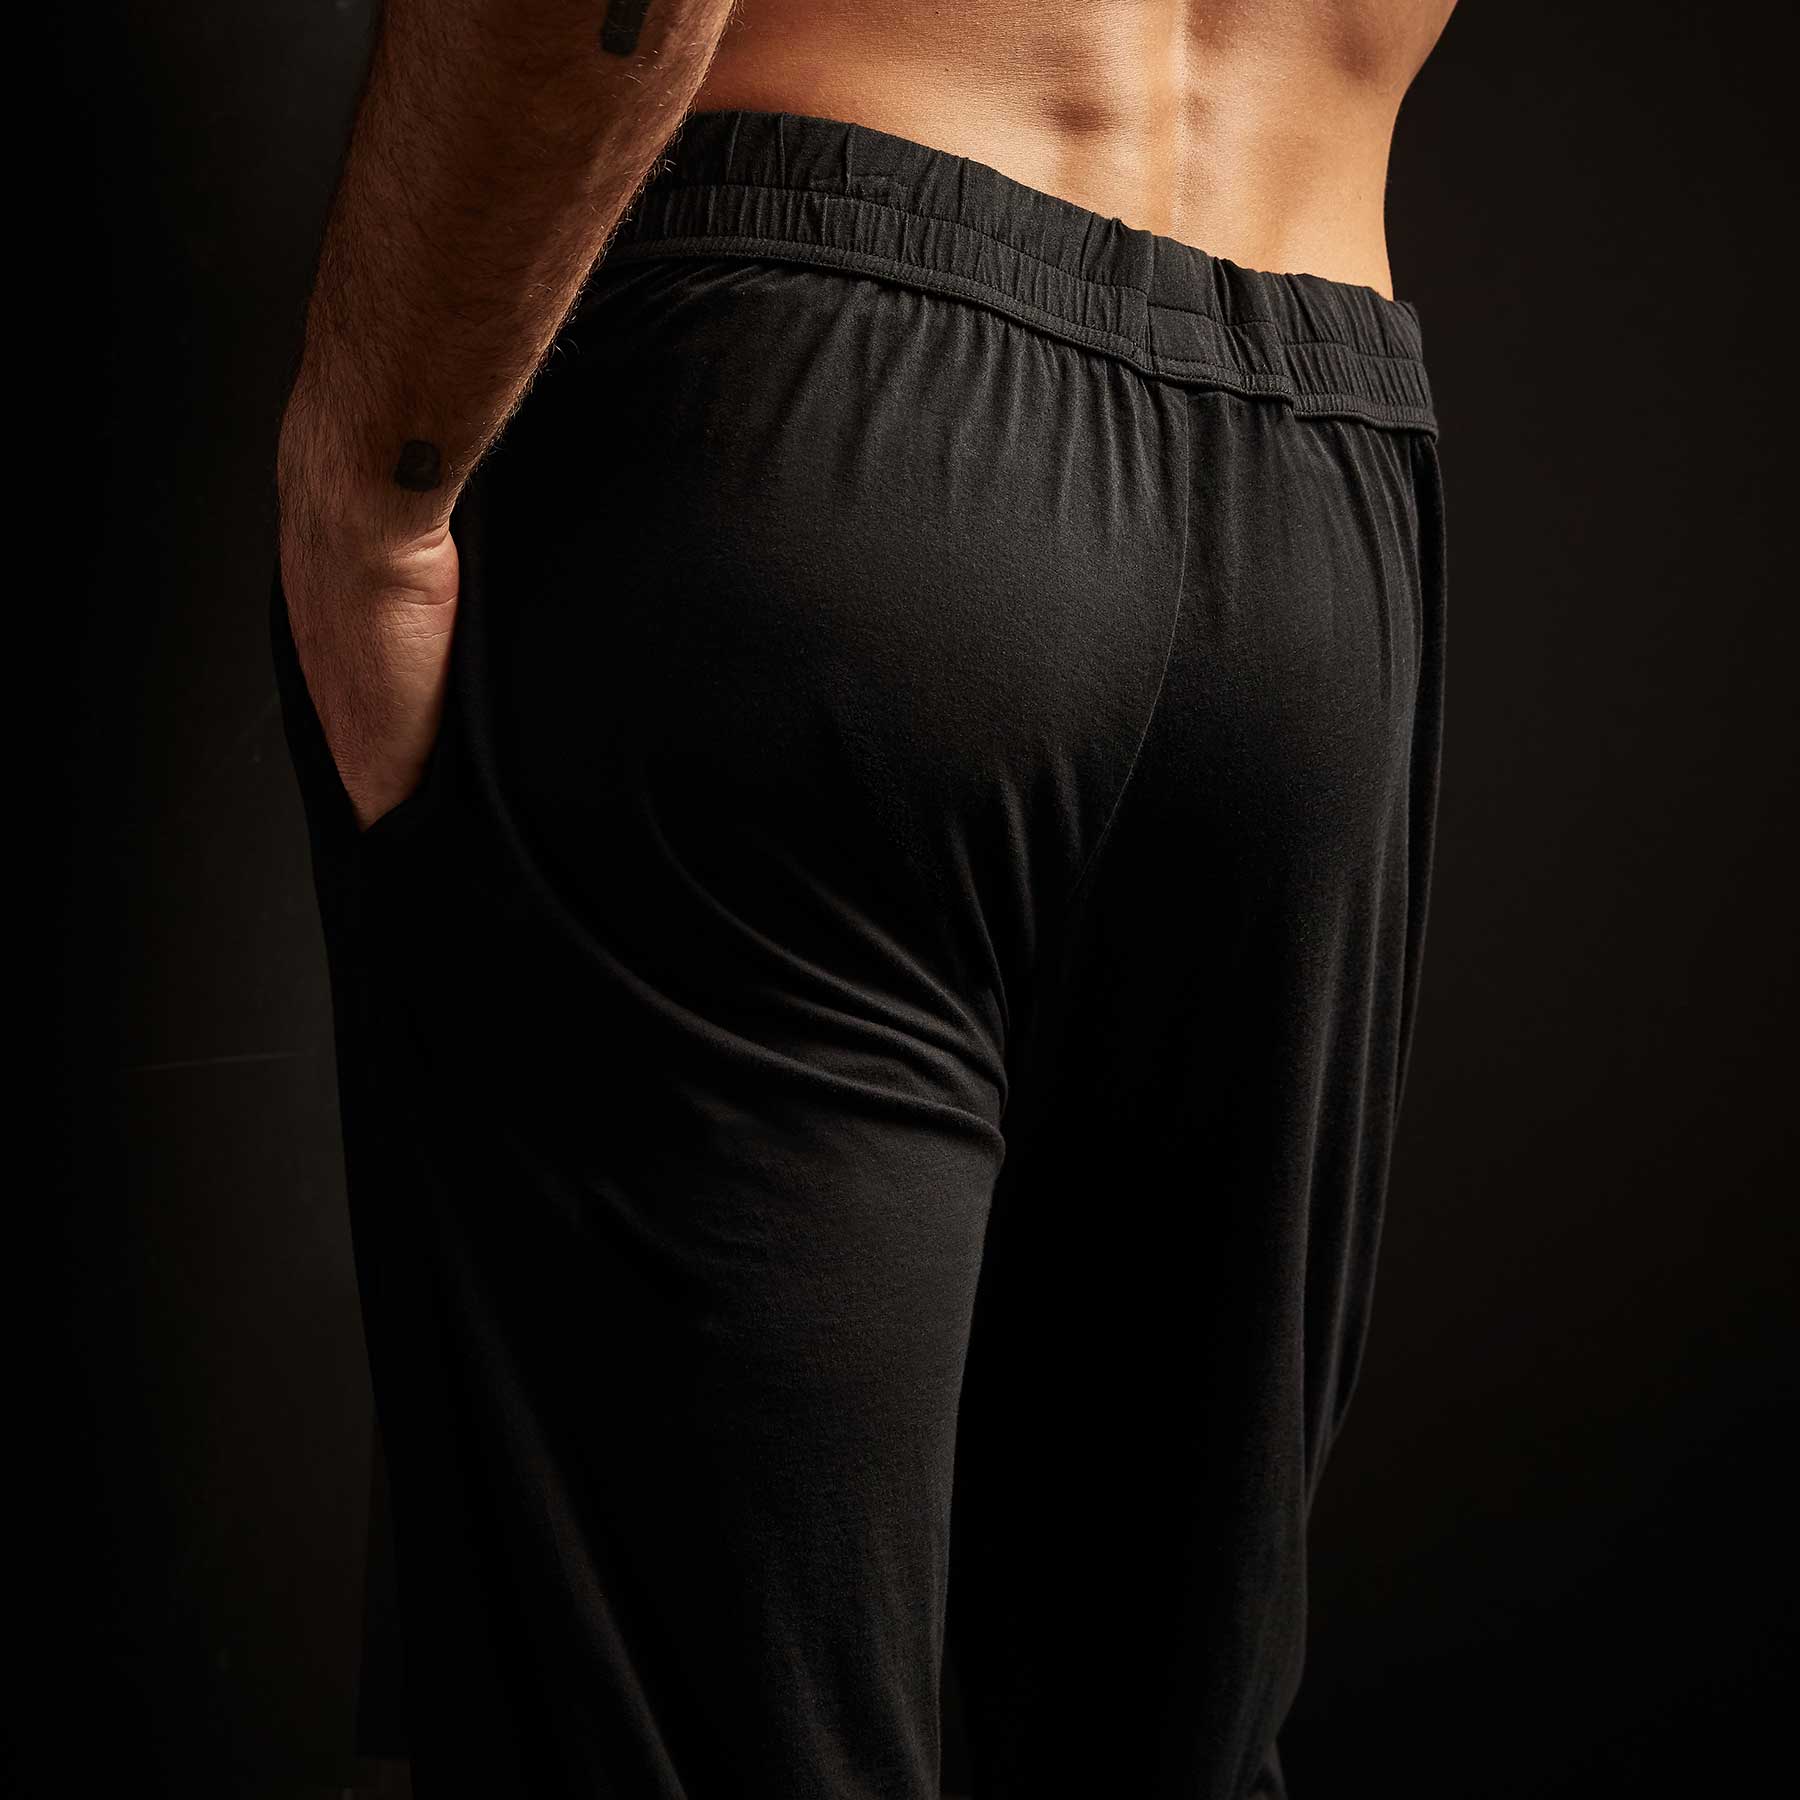 Luxe Lotus Jersey Tapered Lounge Pant - Black